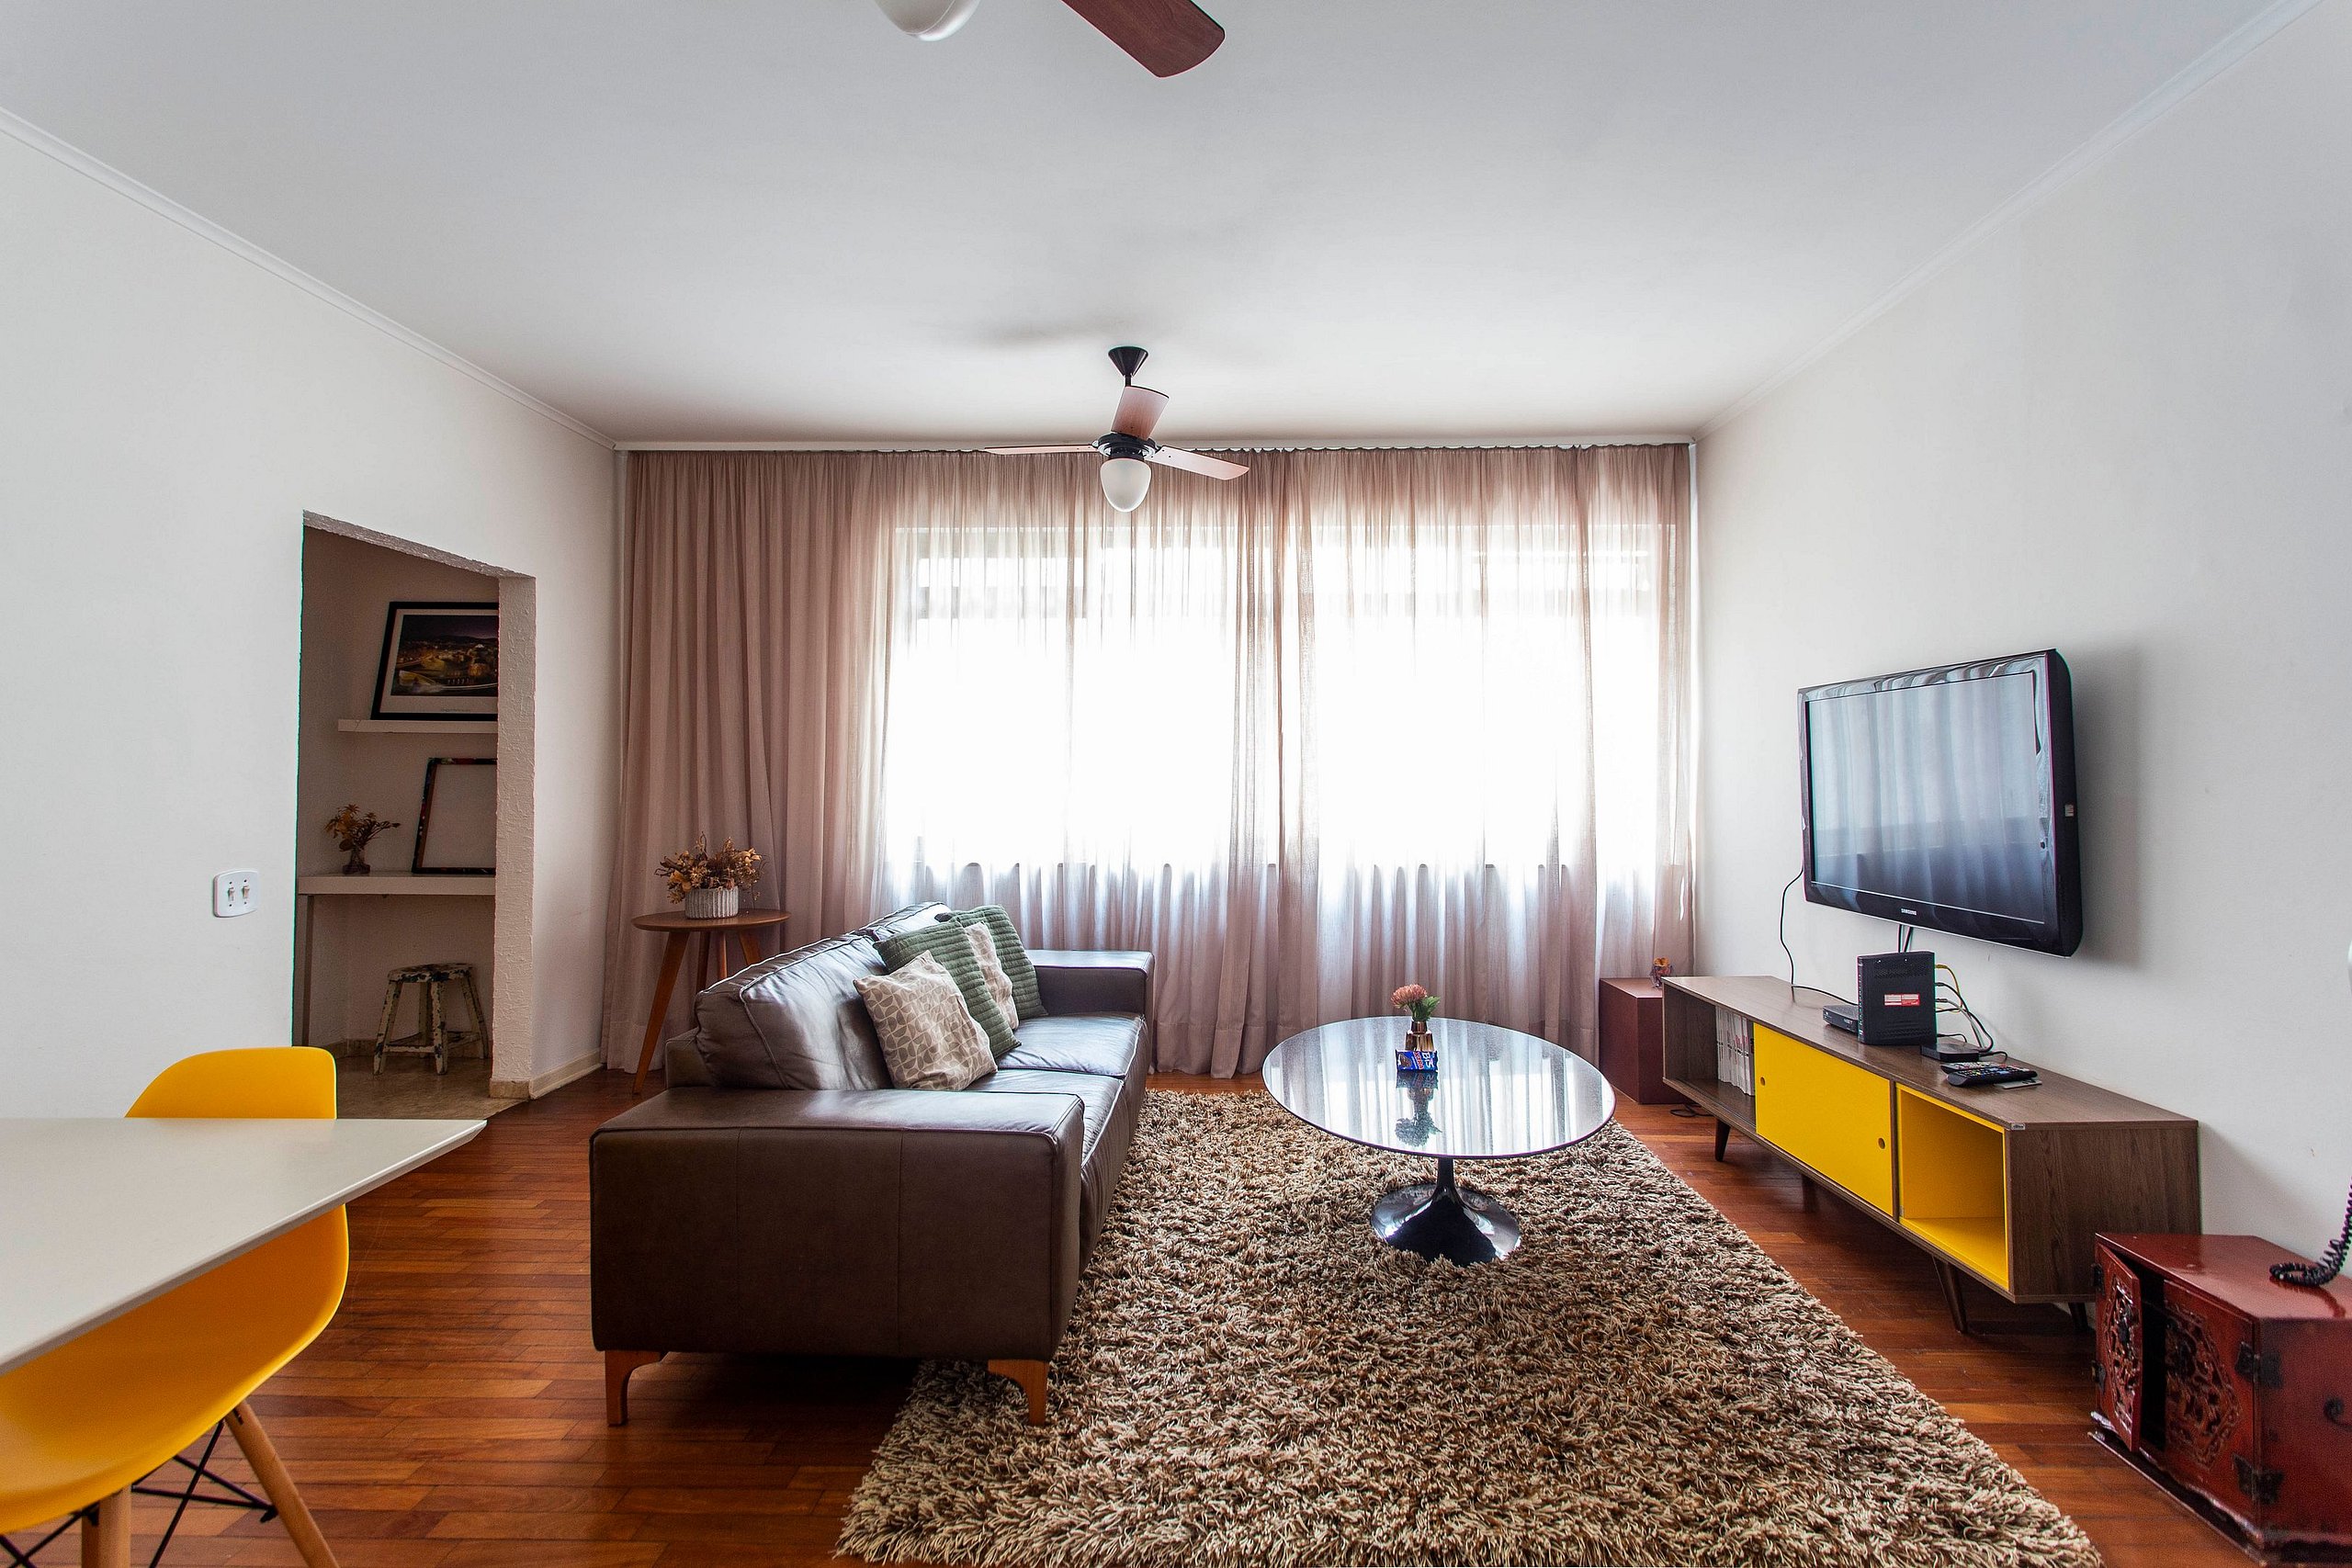 Property Image 2 - Comfort and privileged location at Vilaboim Square